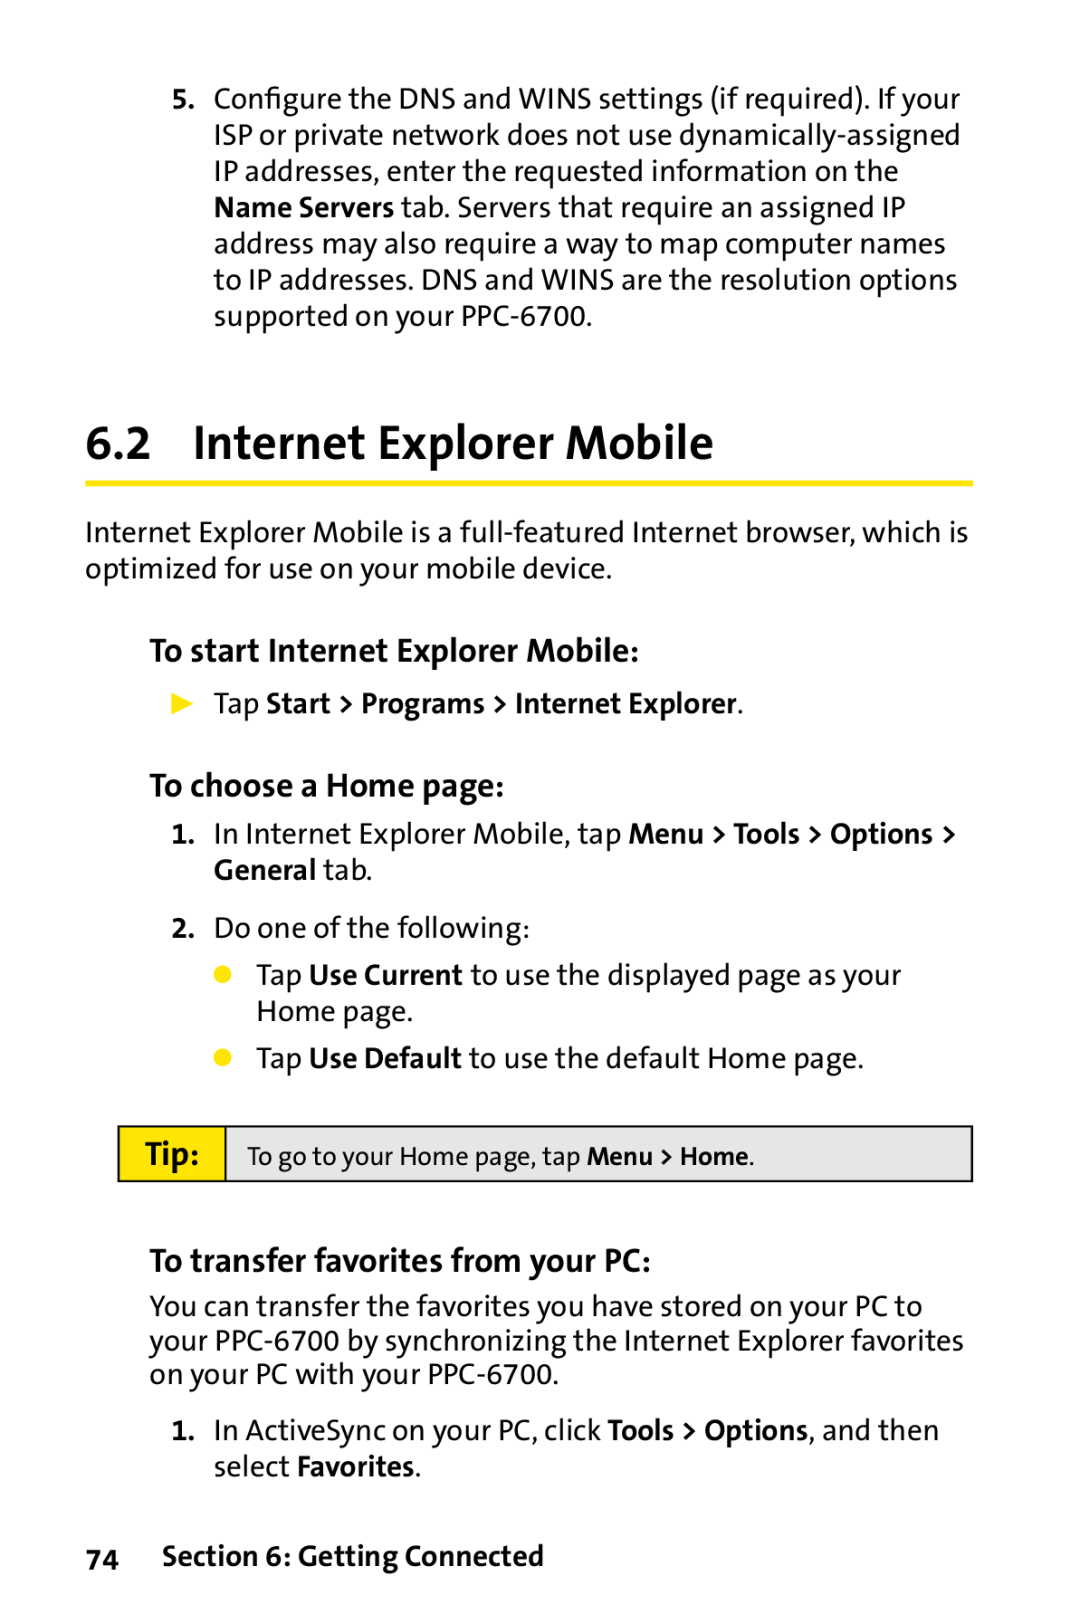 Sprint Nextel PPC-6700 To start Internet Explorer Mobile, To choose a Home page, To transfer favorites from your PC 